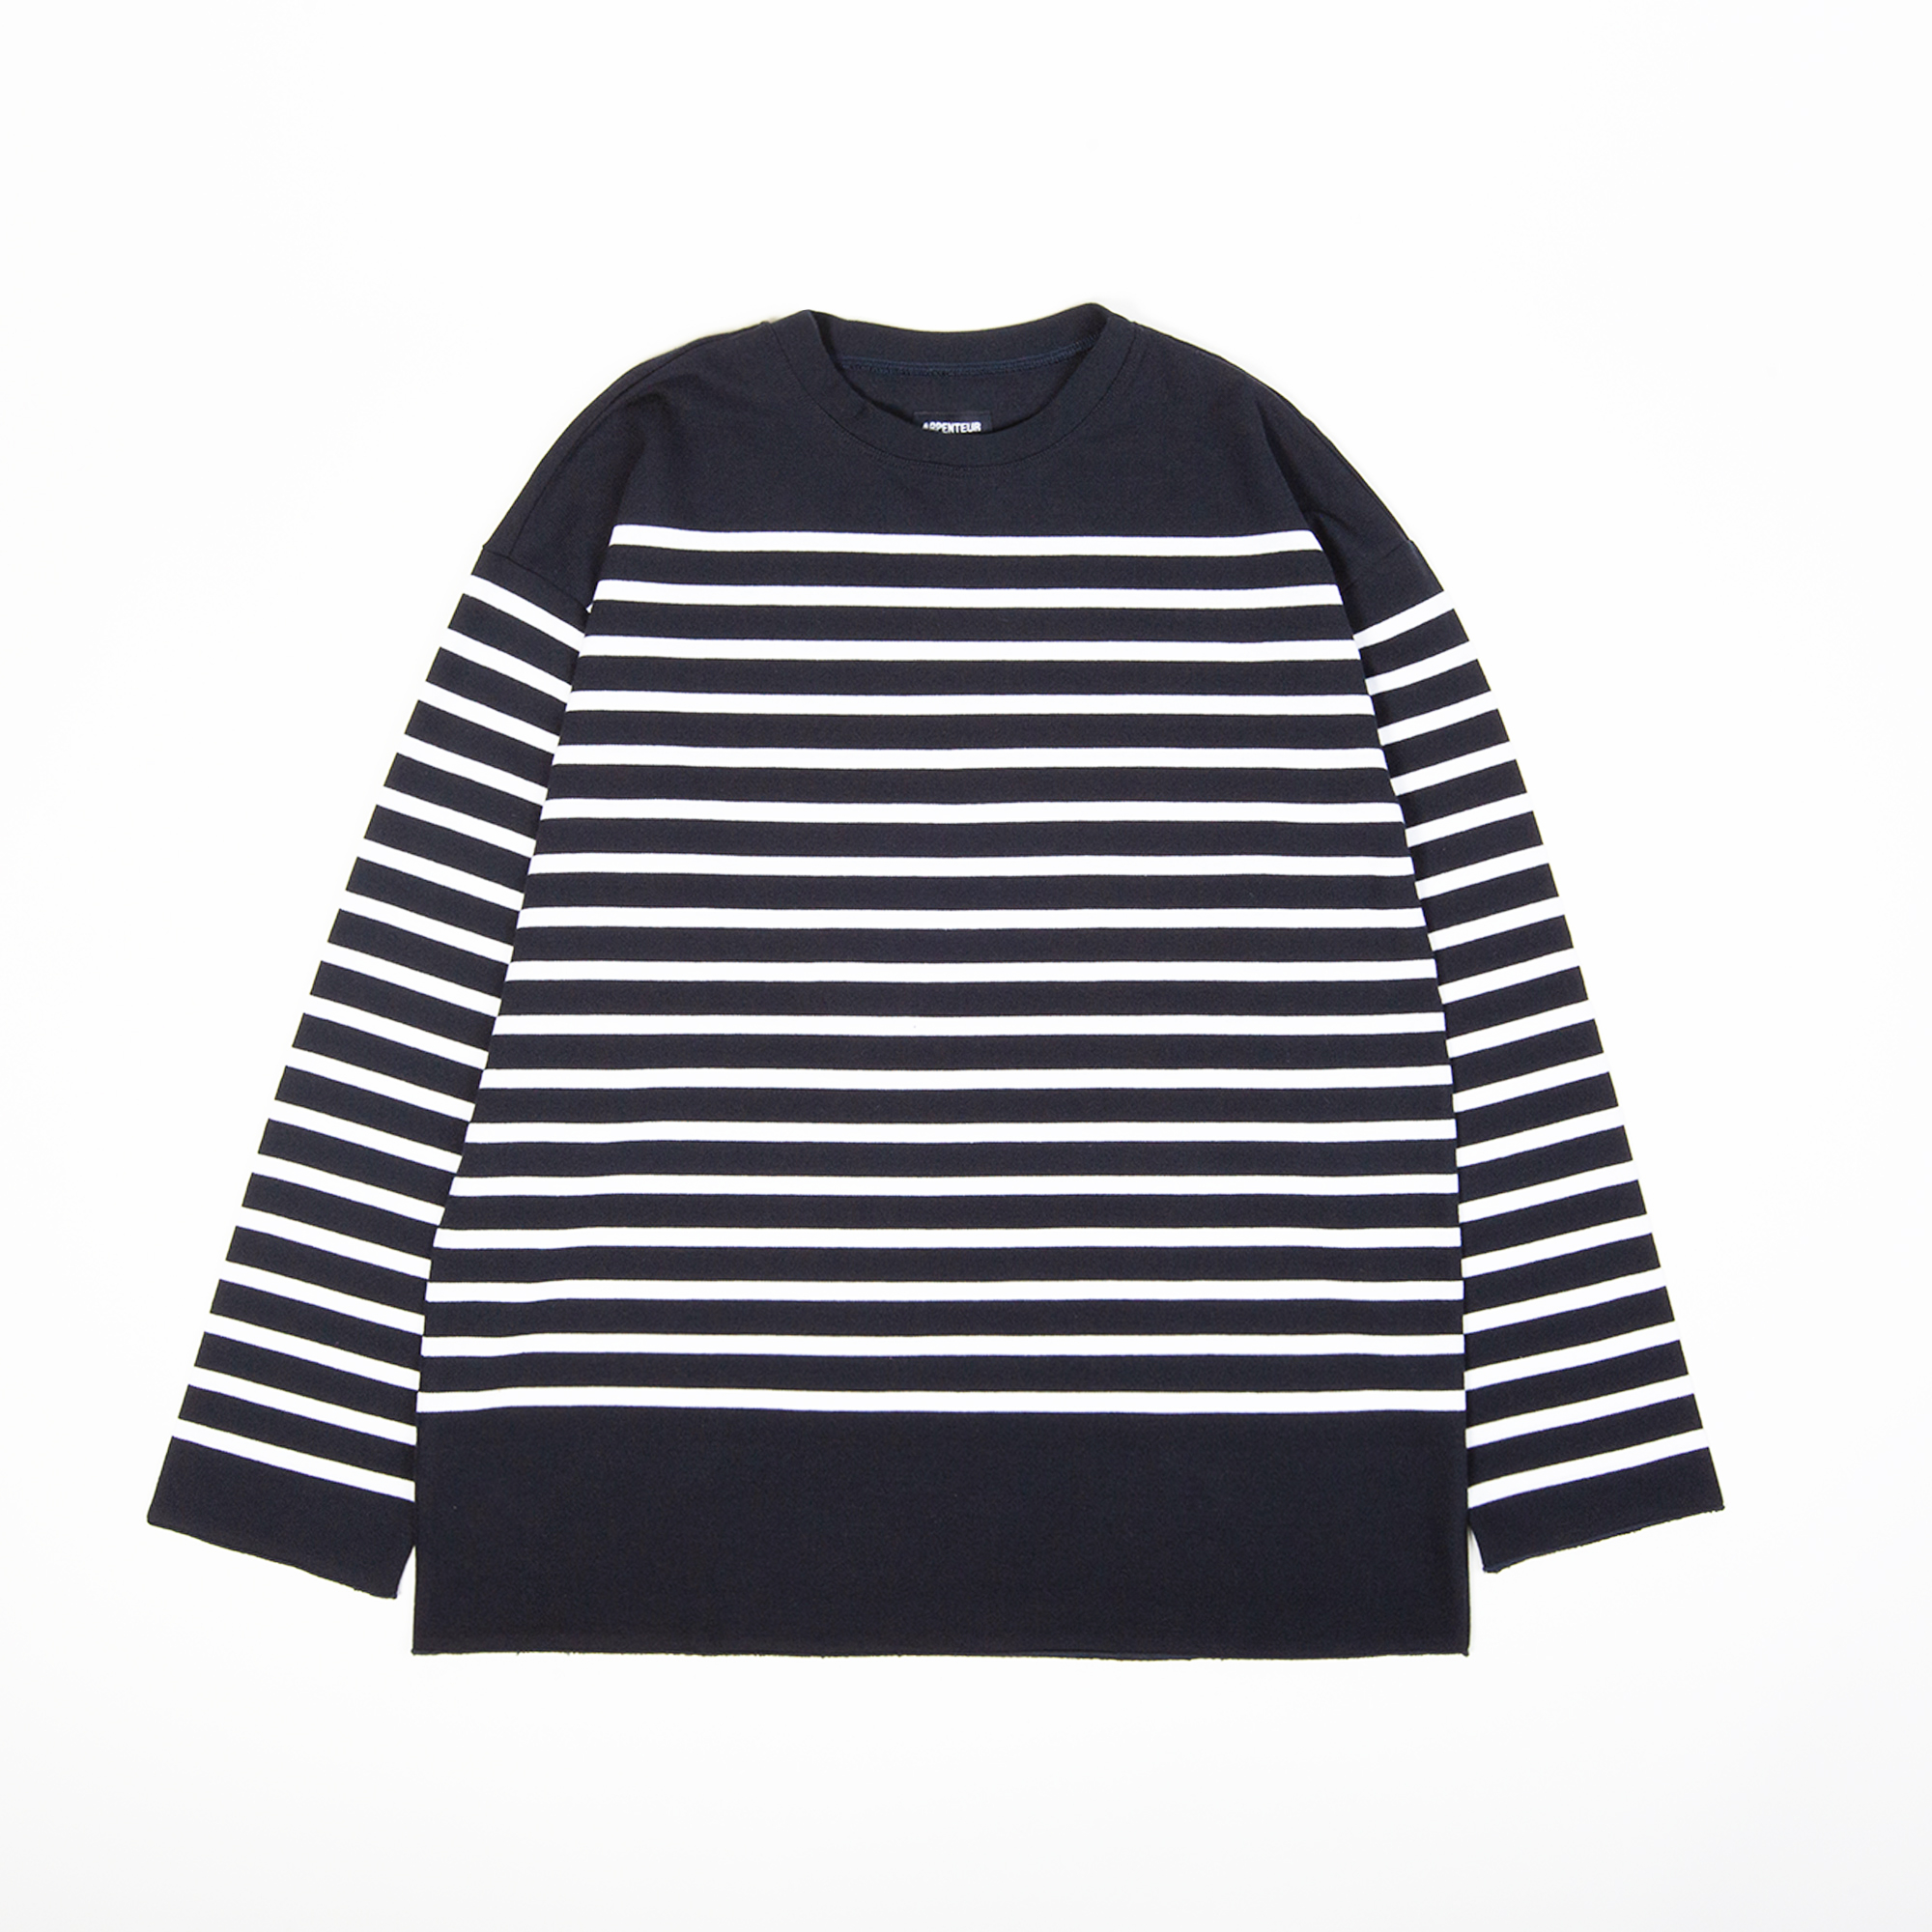 MARINE t-shirt in Midnight White stripes color by Arpenteur